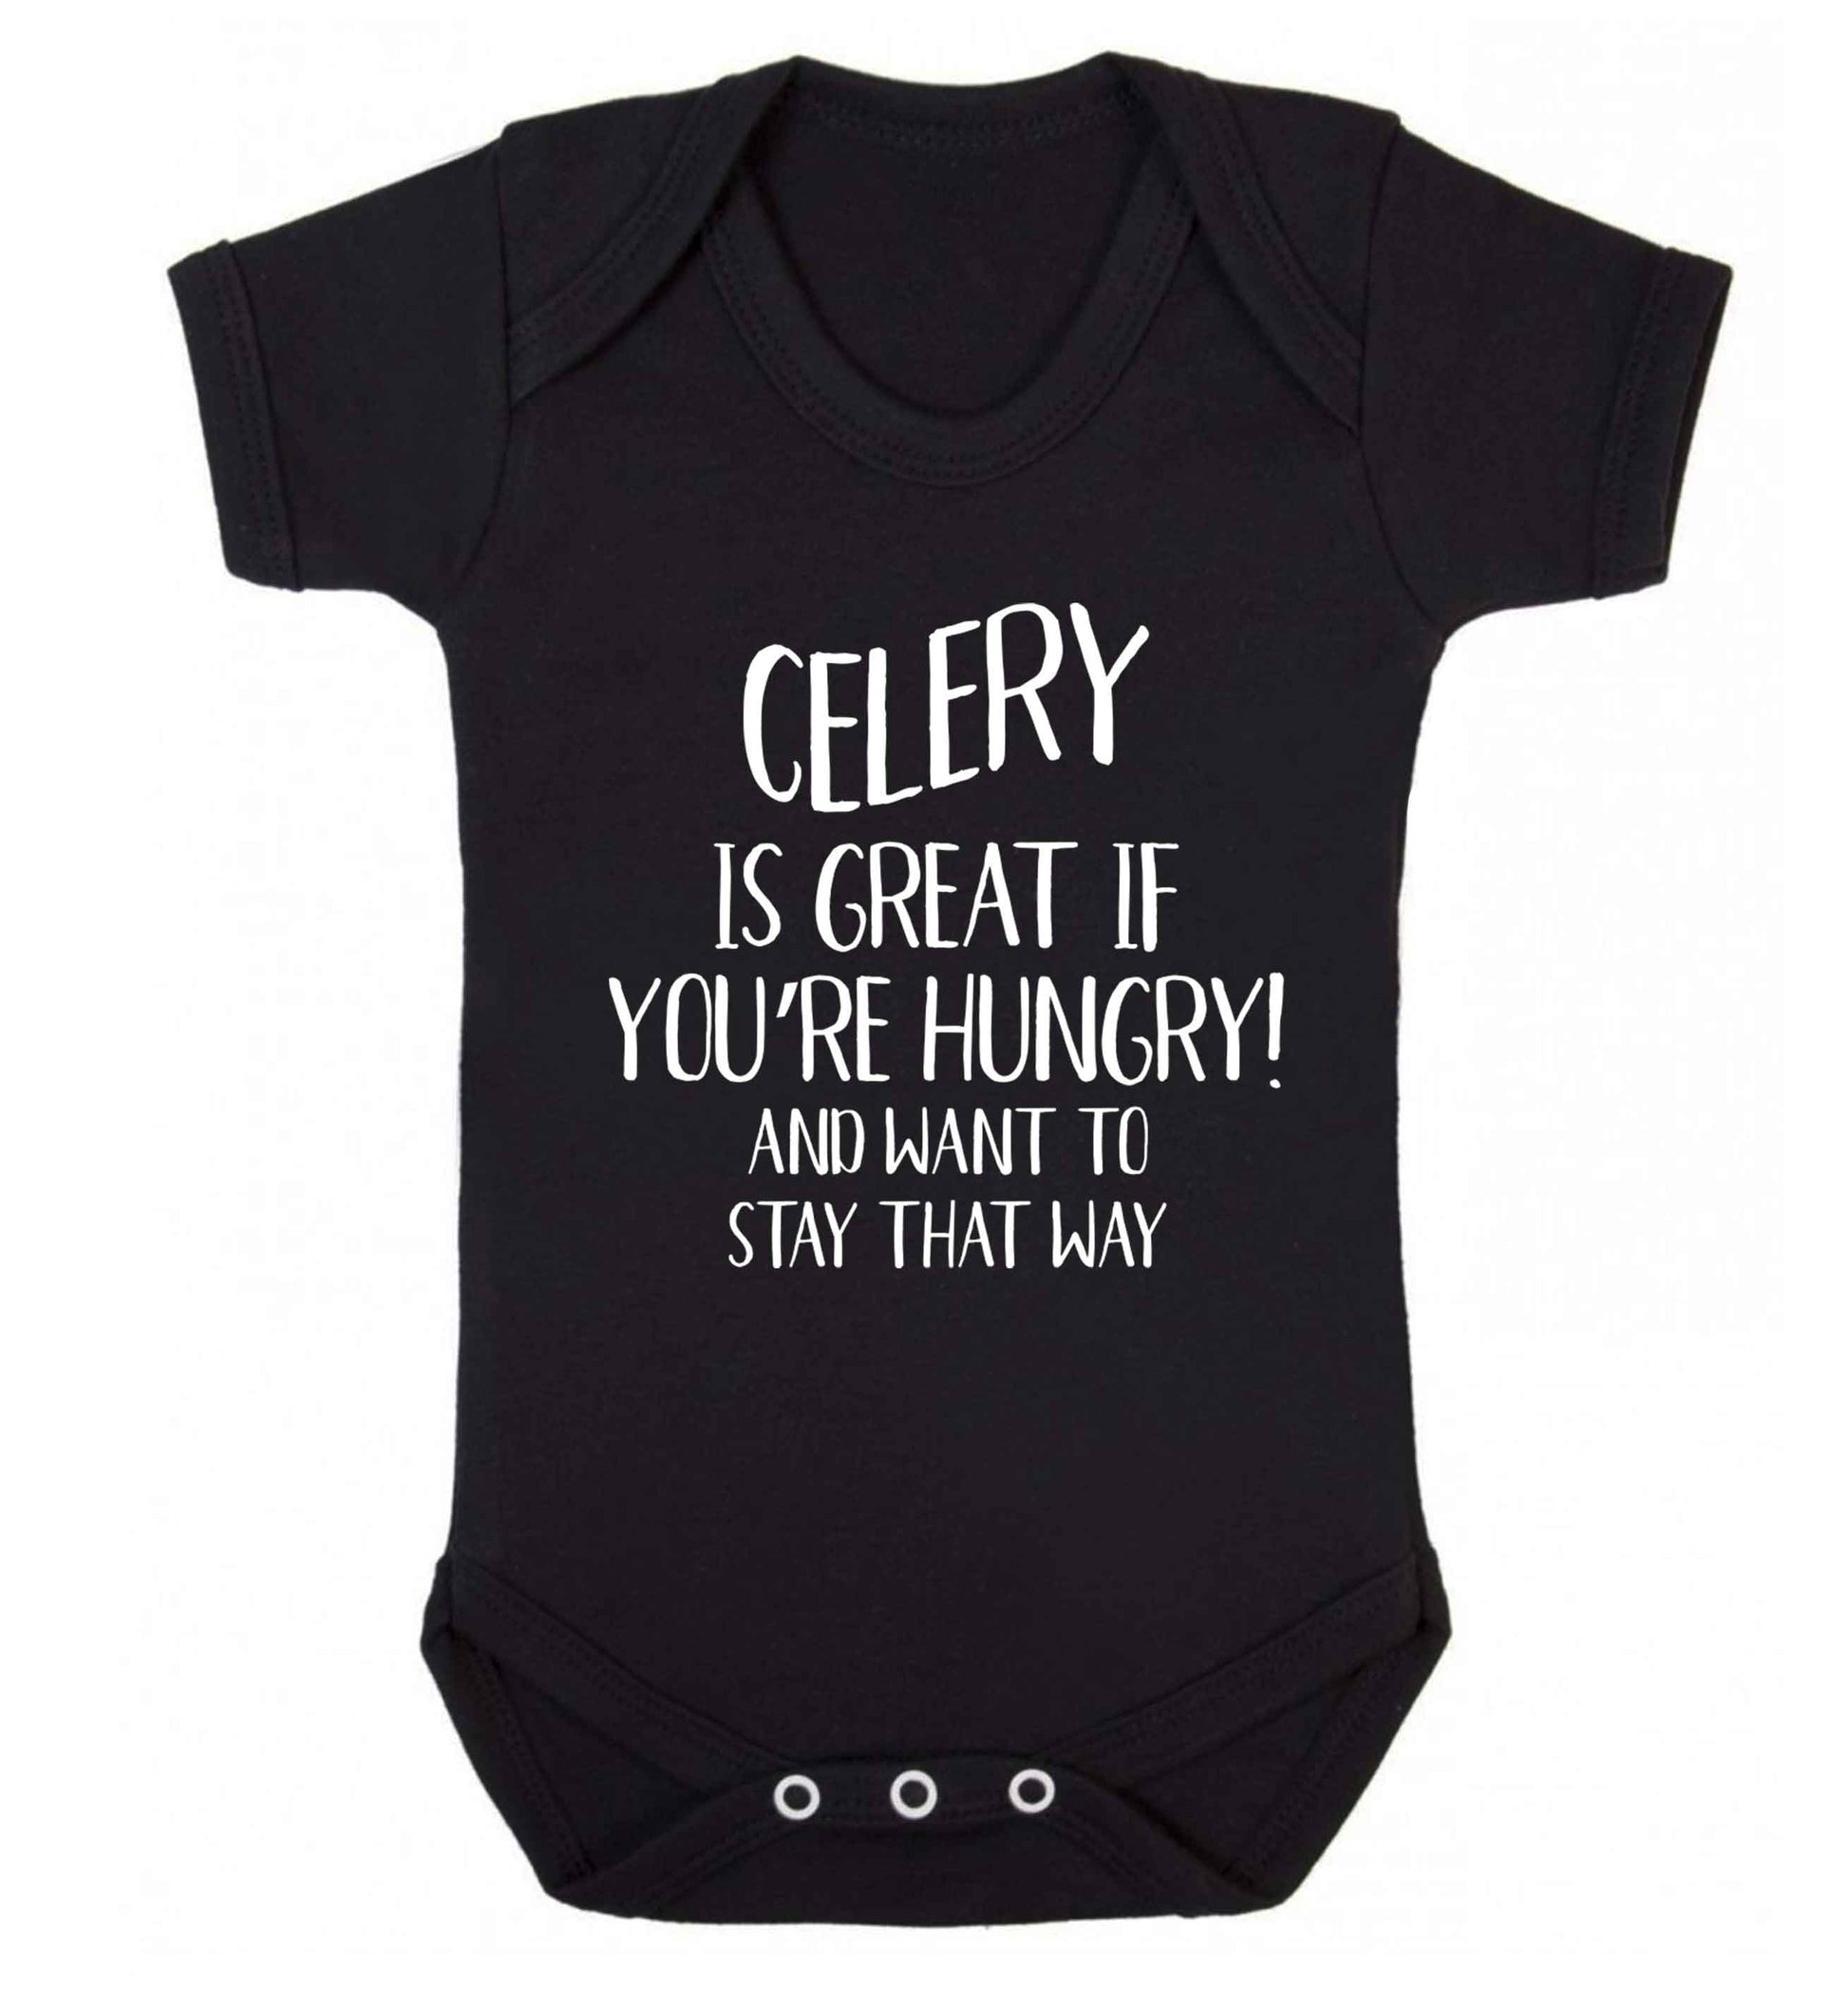 Cellery is great when you're hungry and want to stay that way Baby Vest black 18-24 months